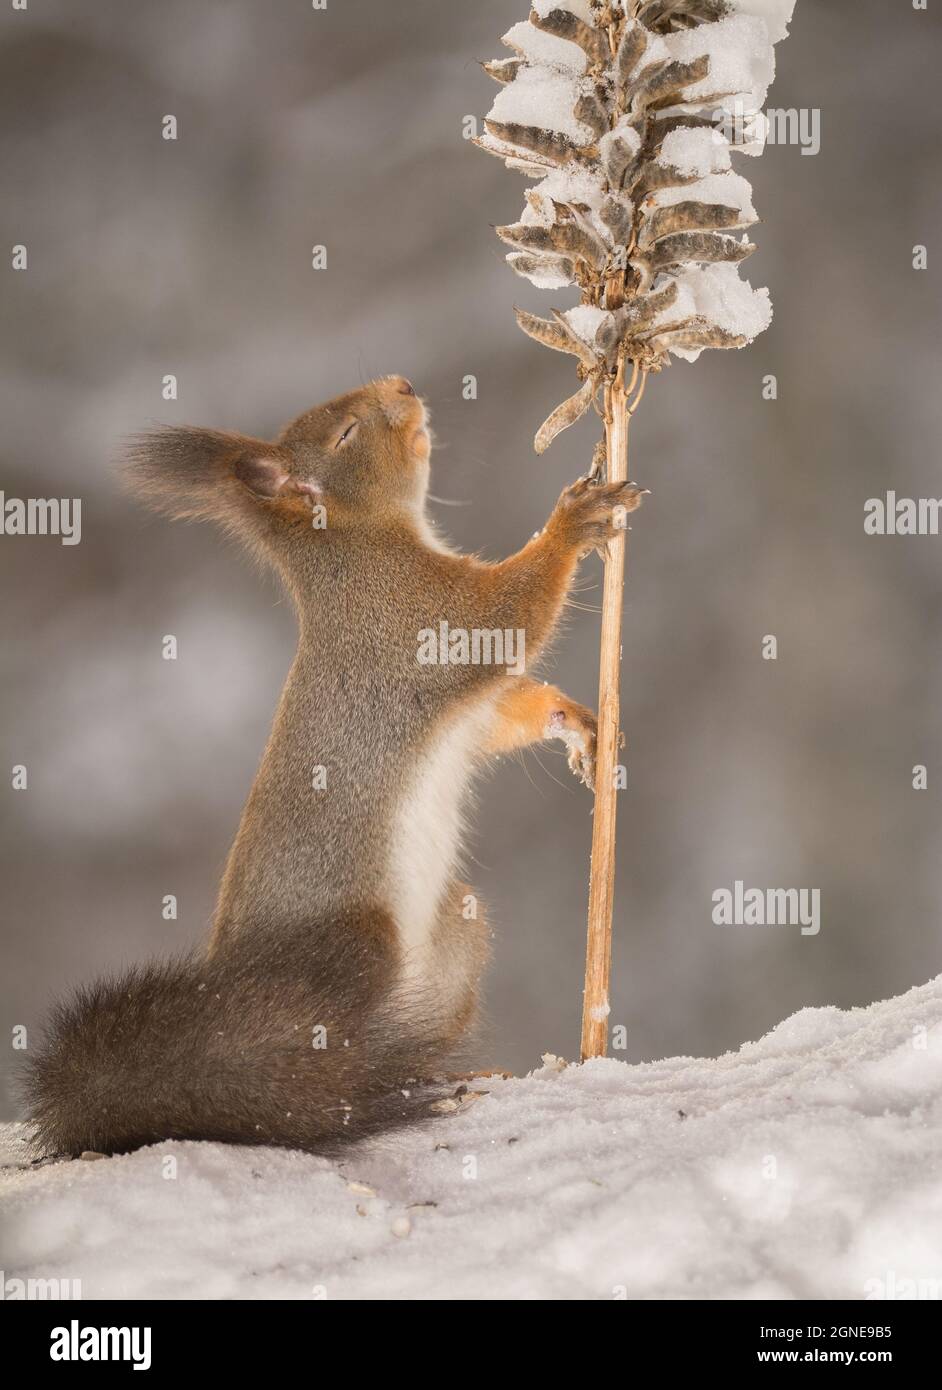 red squirrel standing on snow with a plant with snow in hands Stock Photo